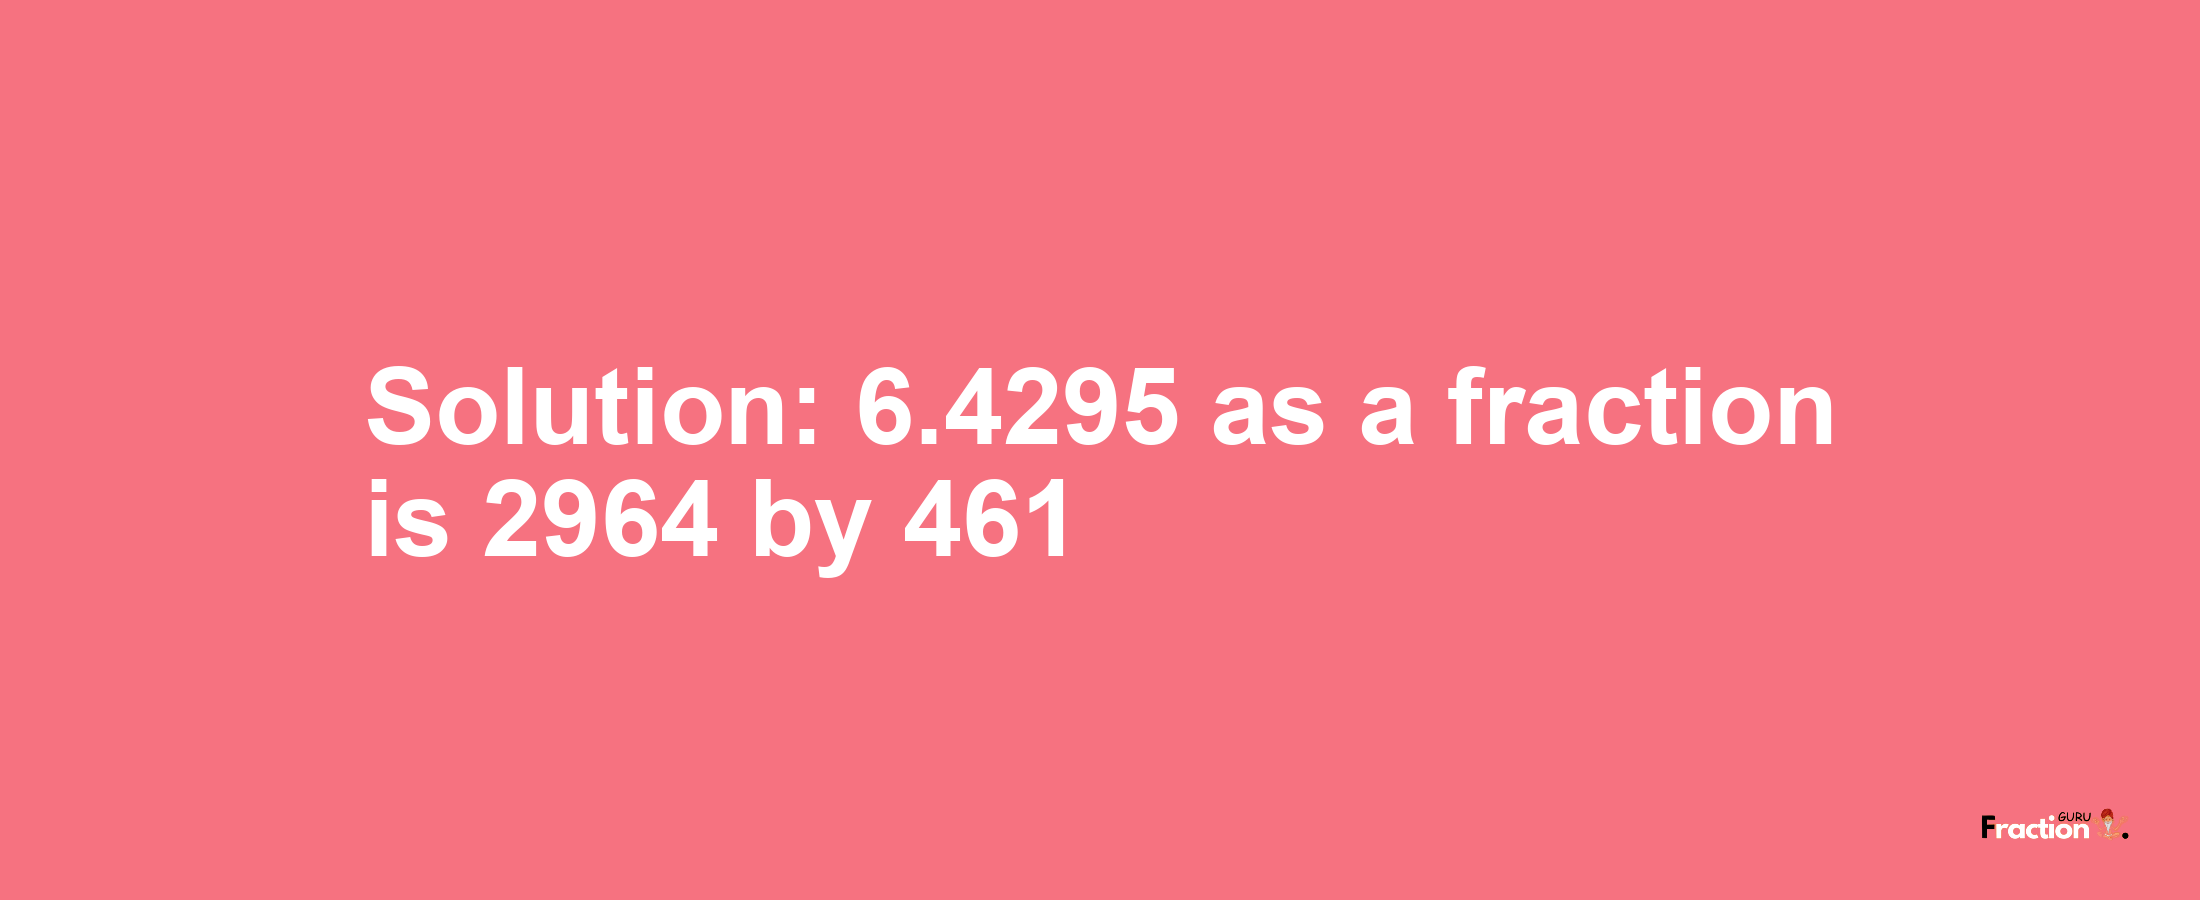 Solution:6.4295 as a fraction is 2964/461